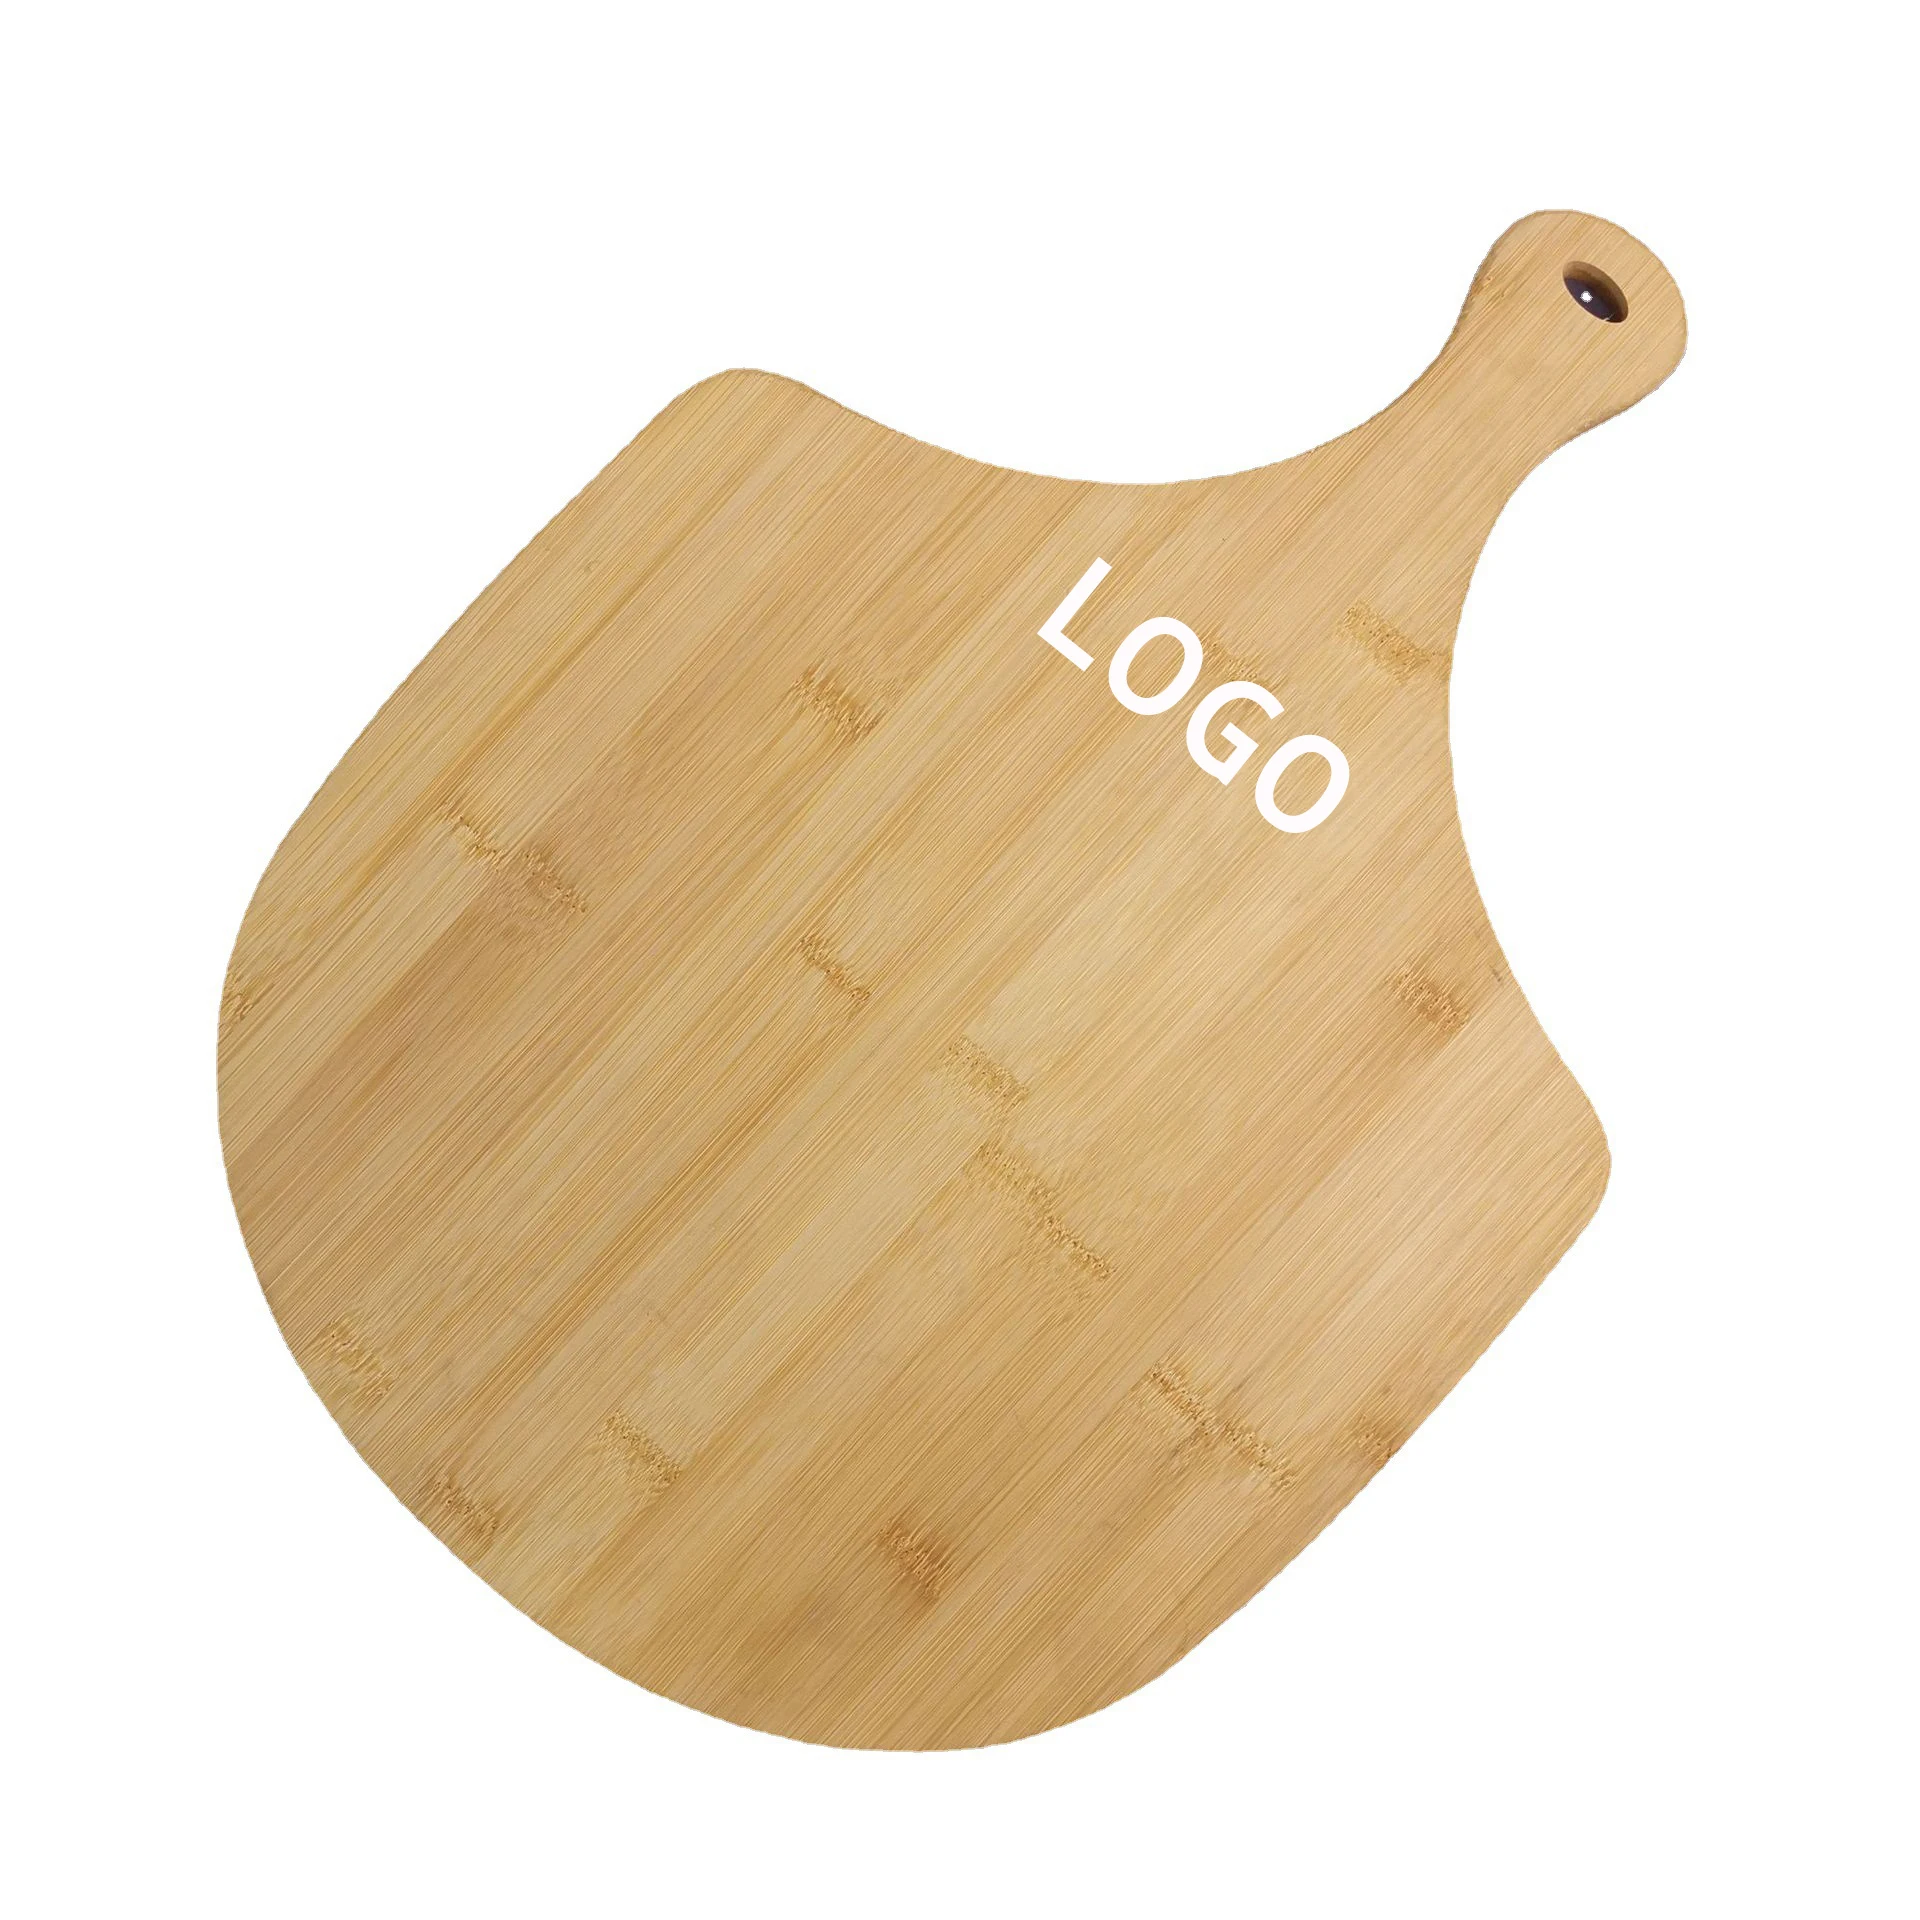 

Kitchen Zone Premium Bamboo Wood Pizza Board Durable Wooden Pizza Peel with Handle Serving Tray and Cutting Board Pizza Peels